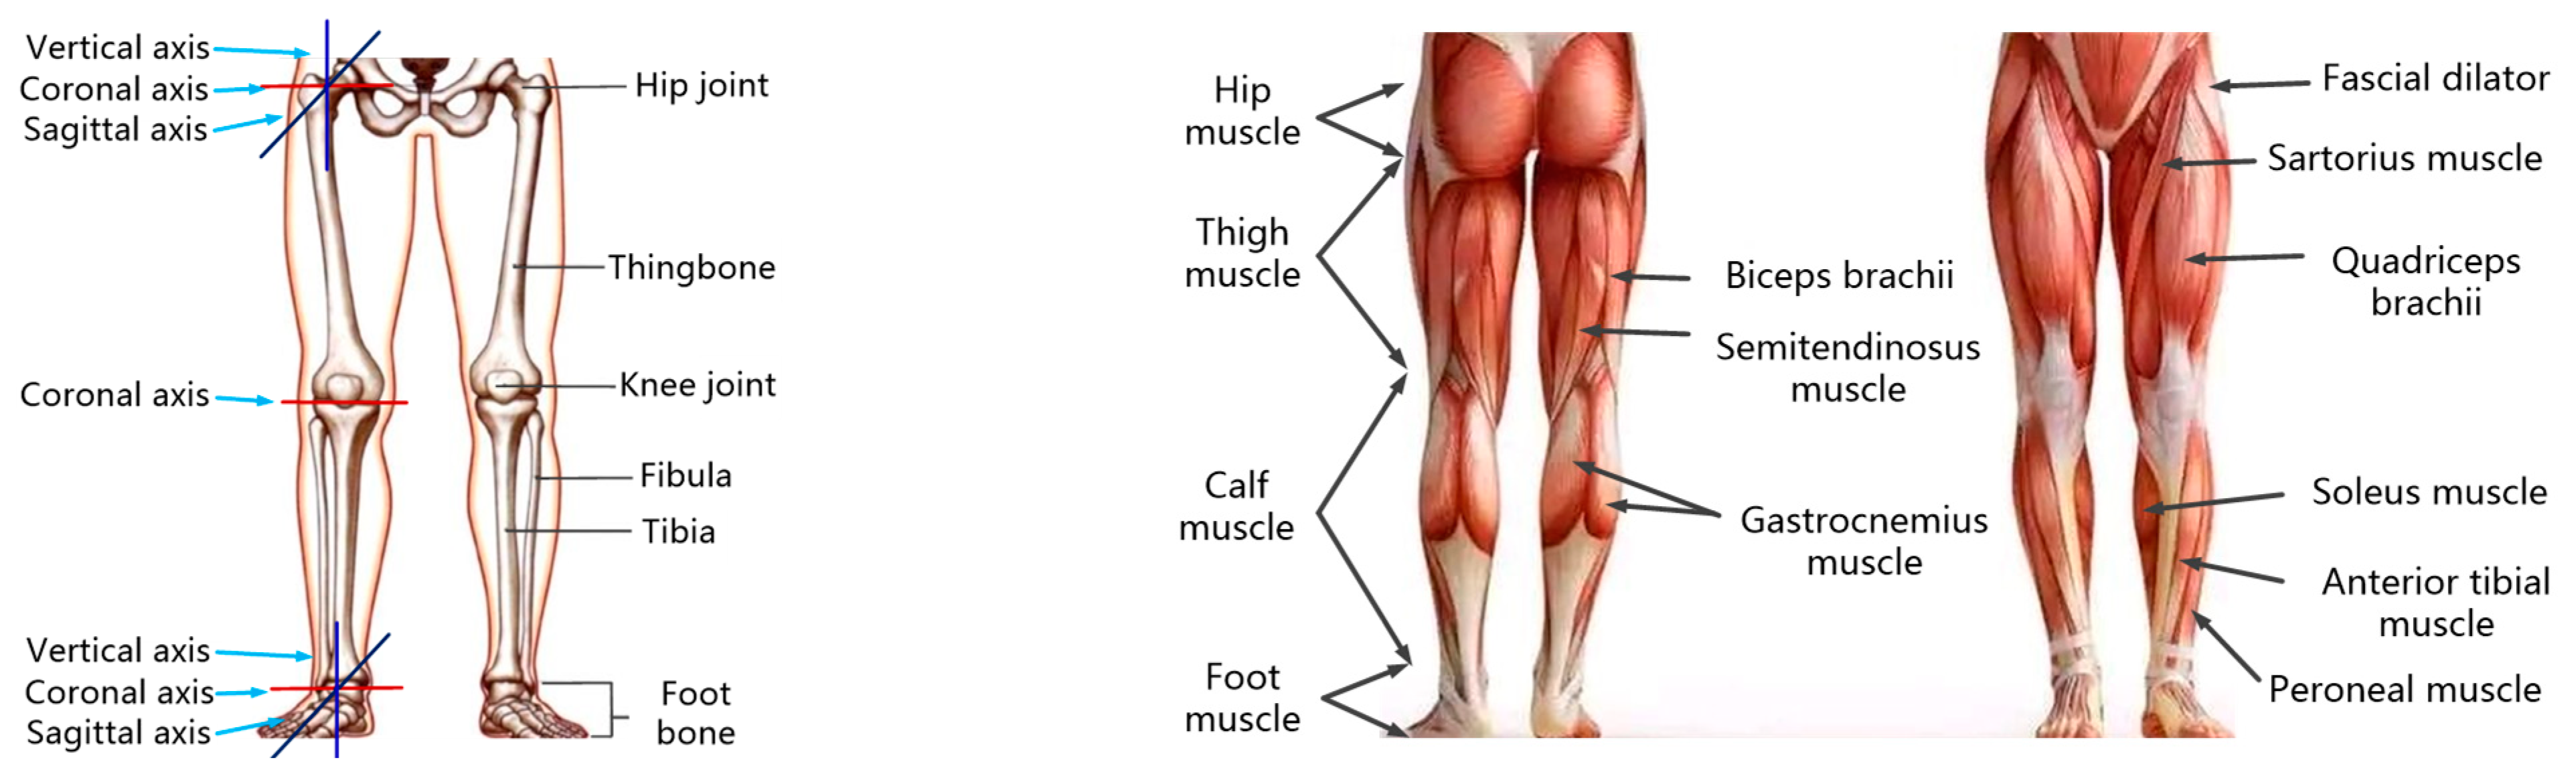 Muscles of the Lower Limb